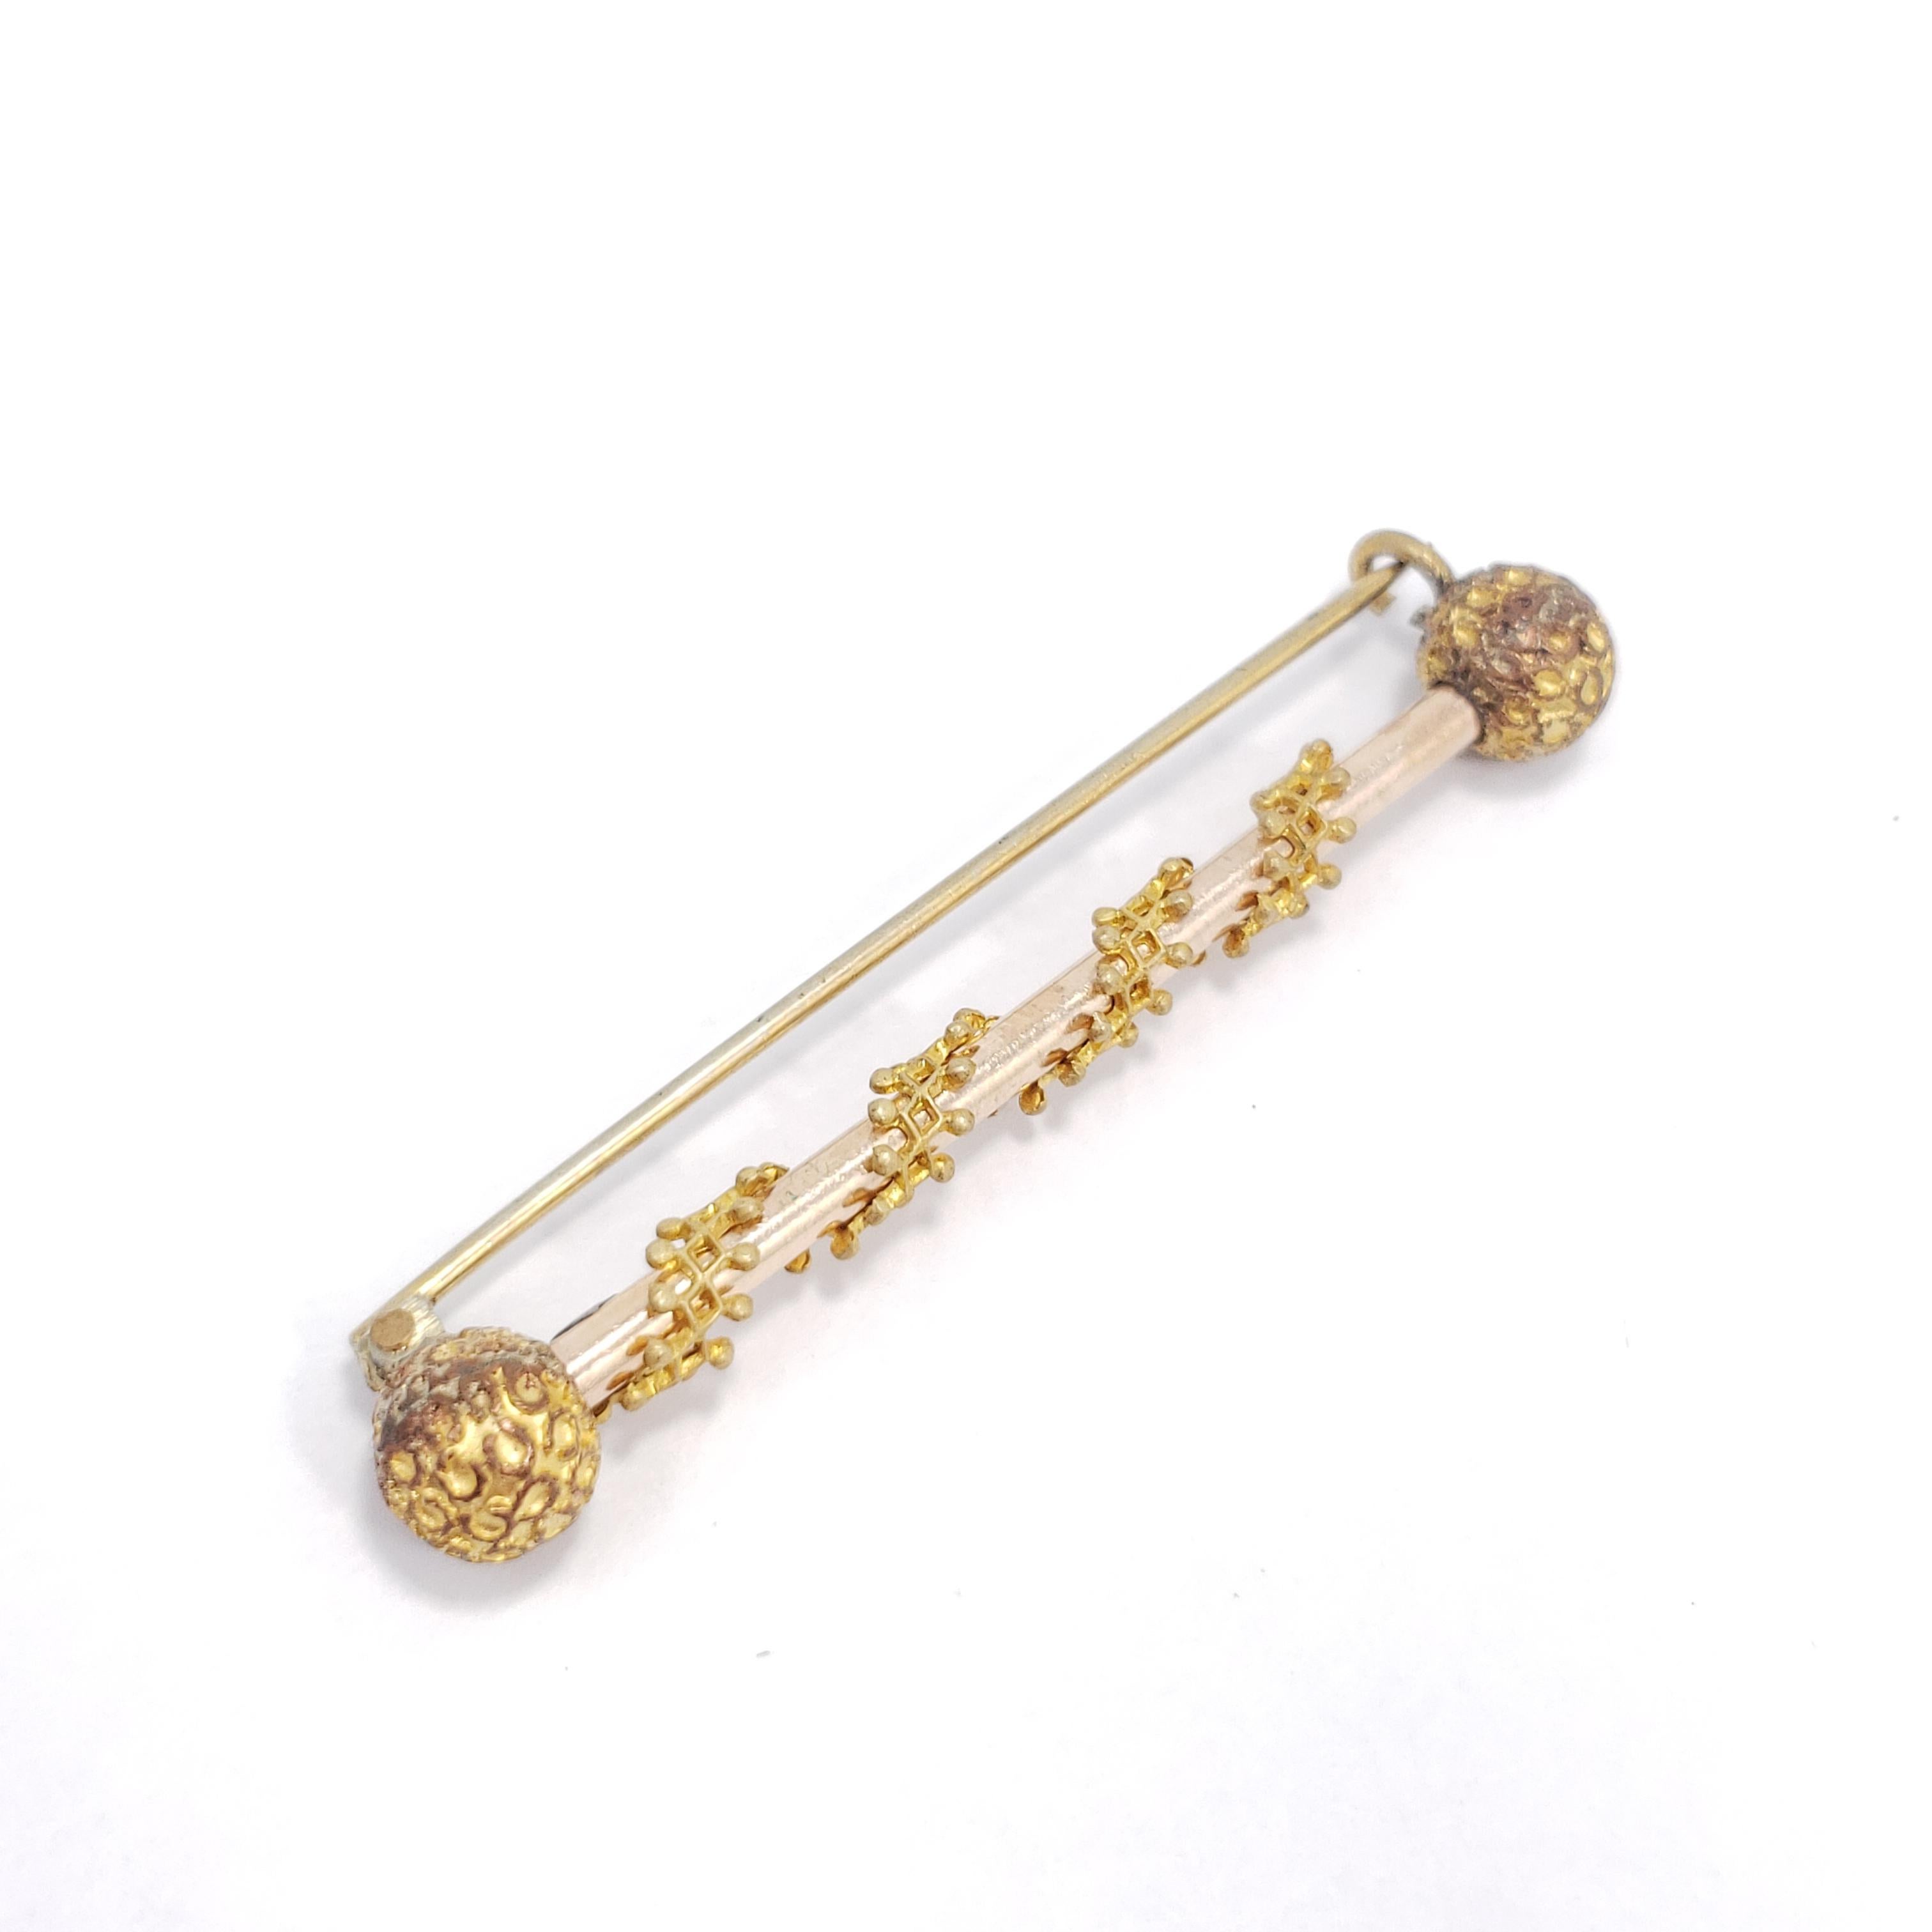 Stylish, vintage art-deco accessory. This golden bar brooch features decorative accents for a sophisticated touch.

Early 1900s open clasp closure. Gold-tone.